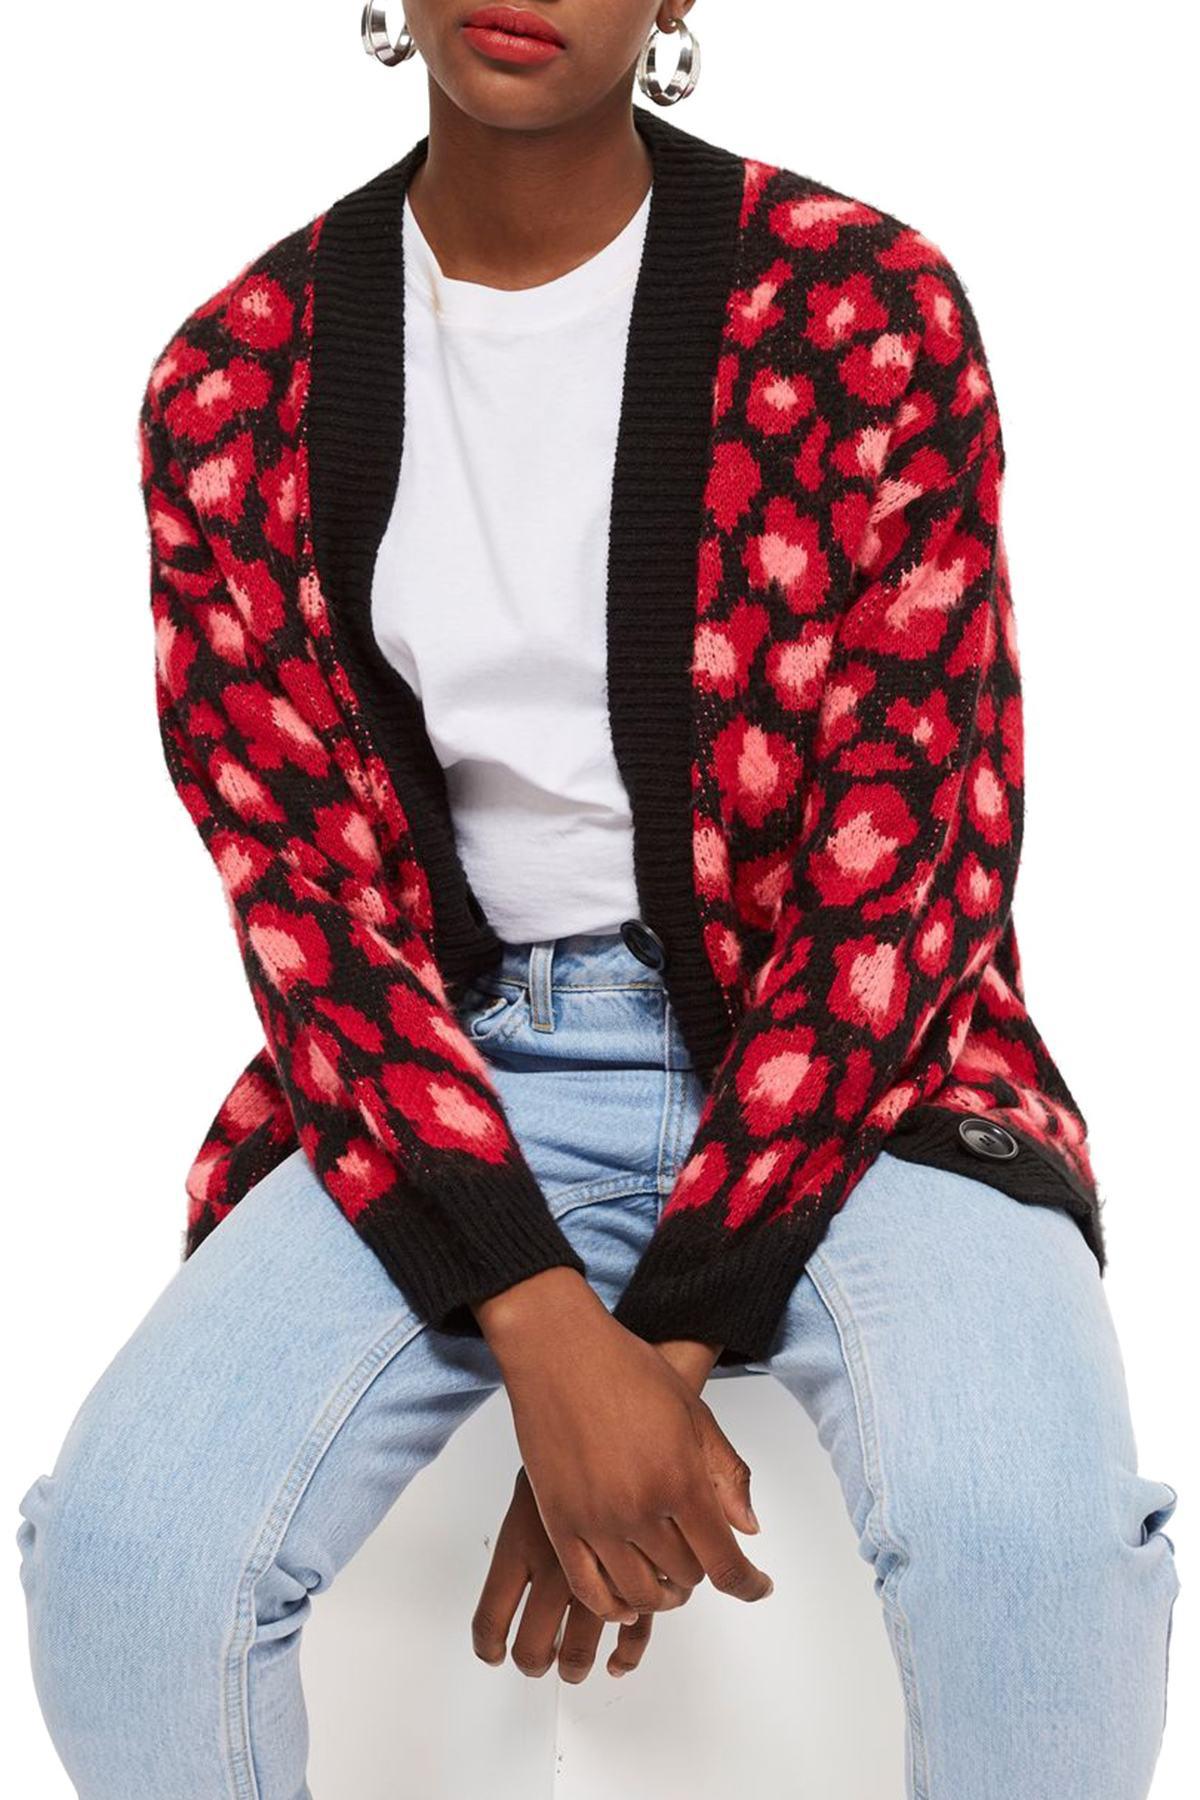 TOPSHOP Leopard Print Cardigan in Red - Lyst